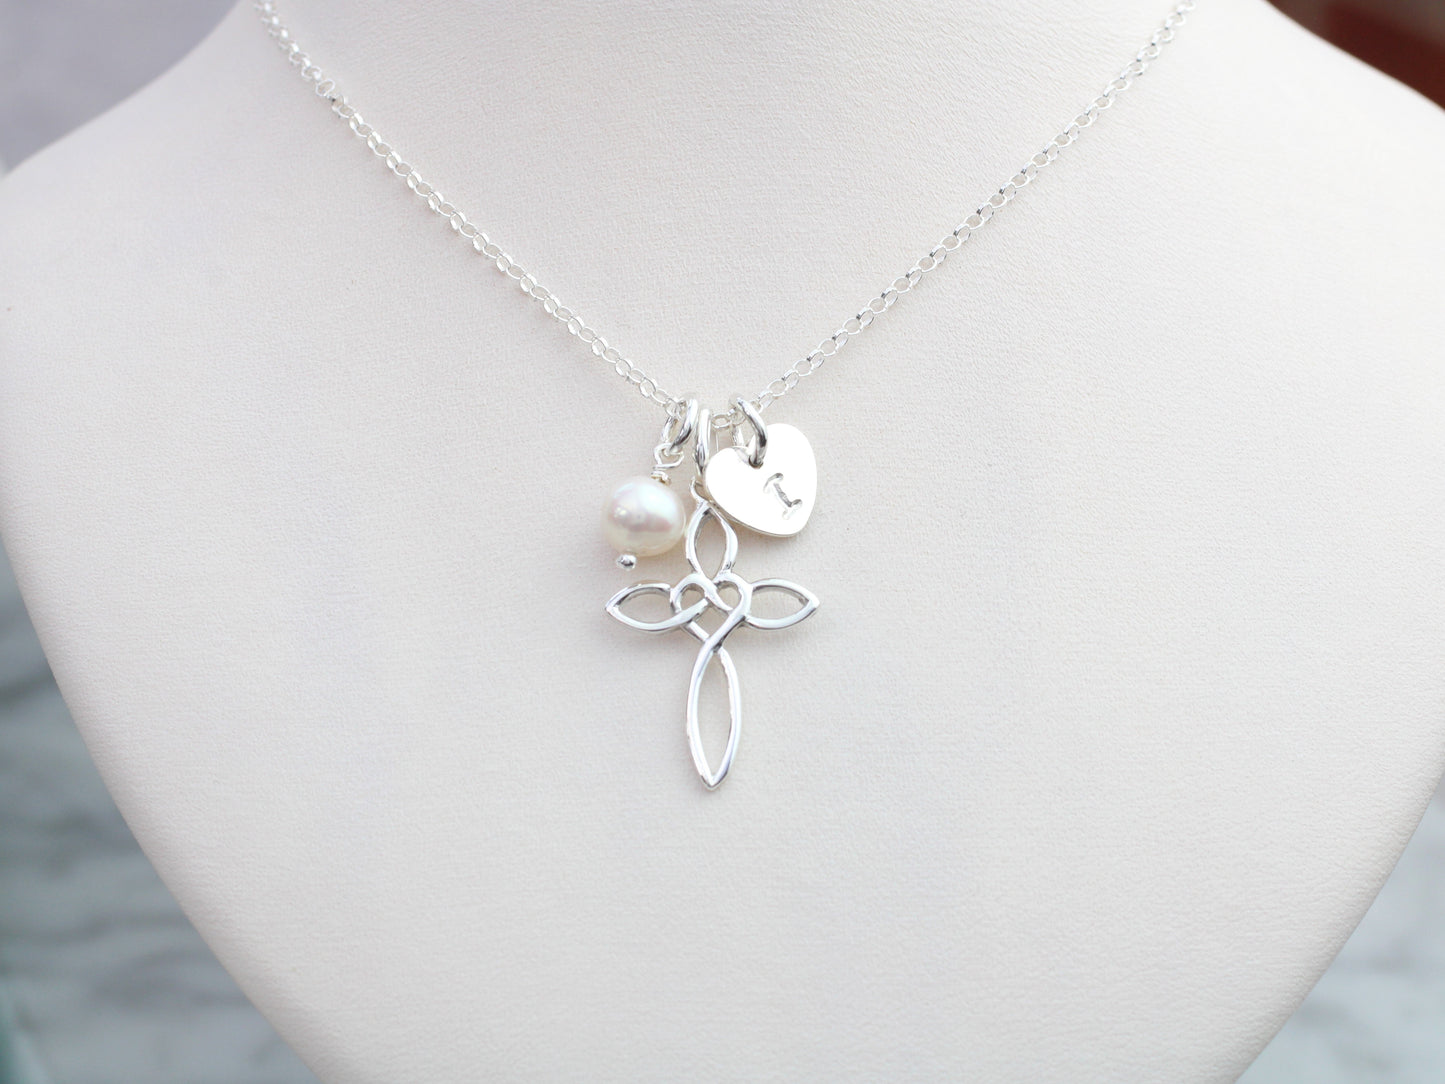 Personalised cross necklace with freshwater pearl.